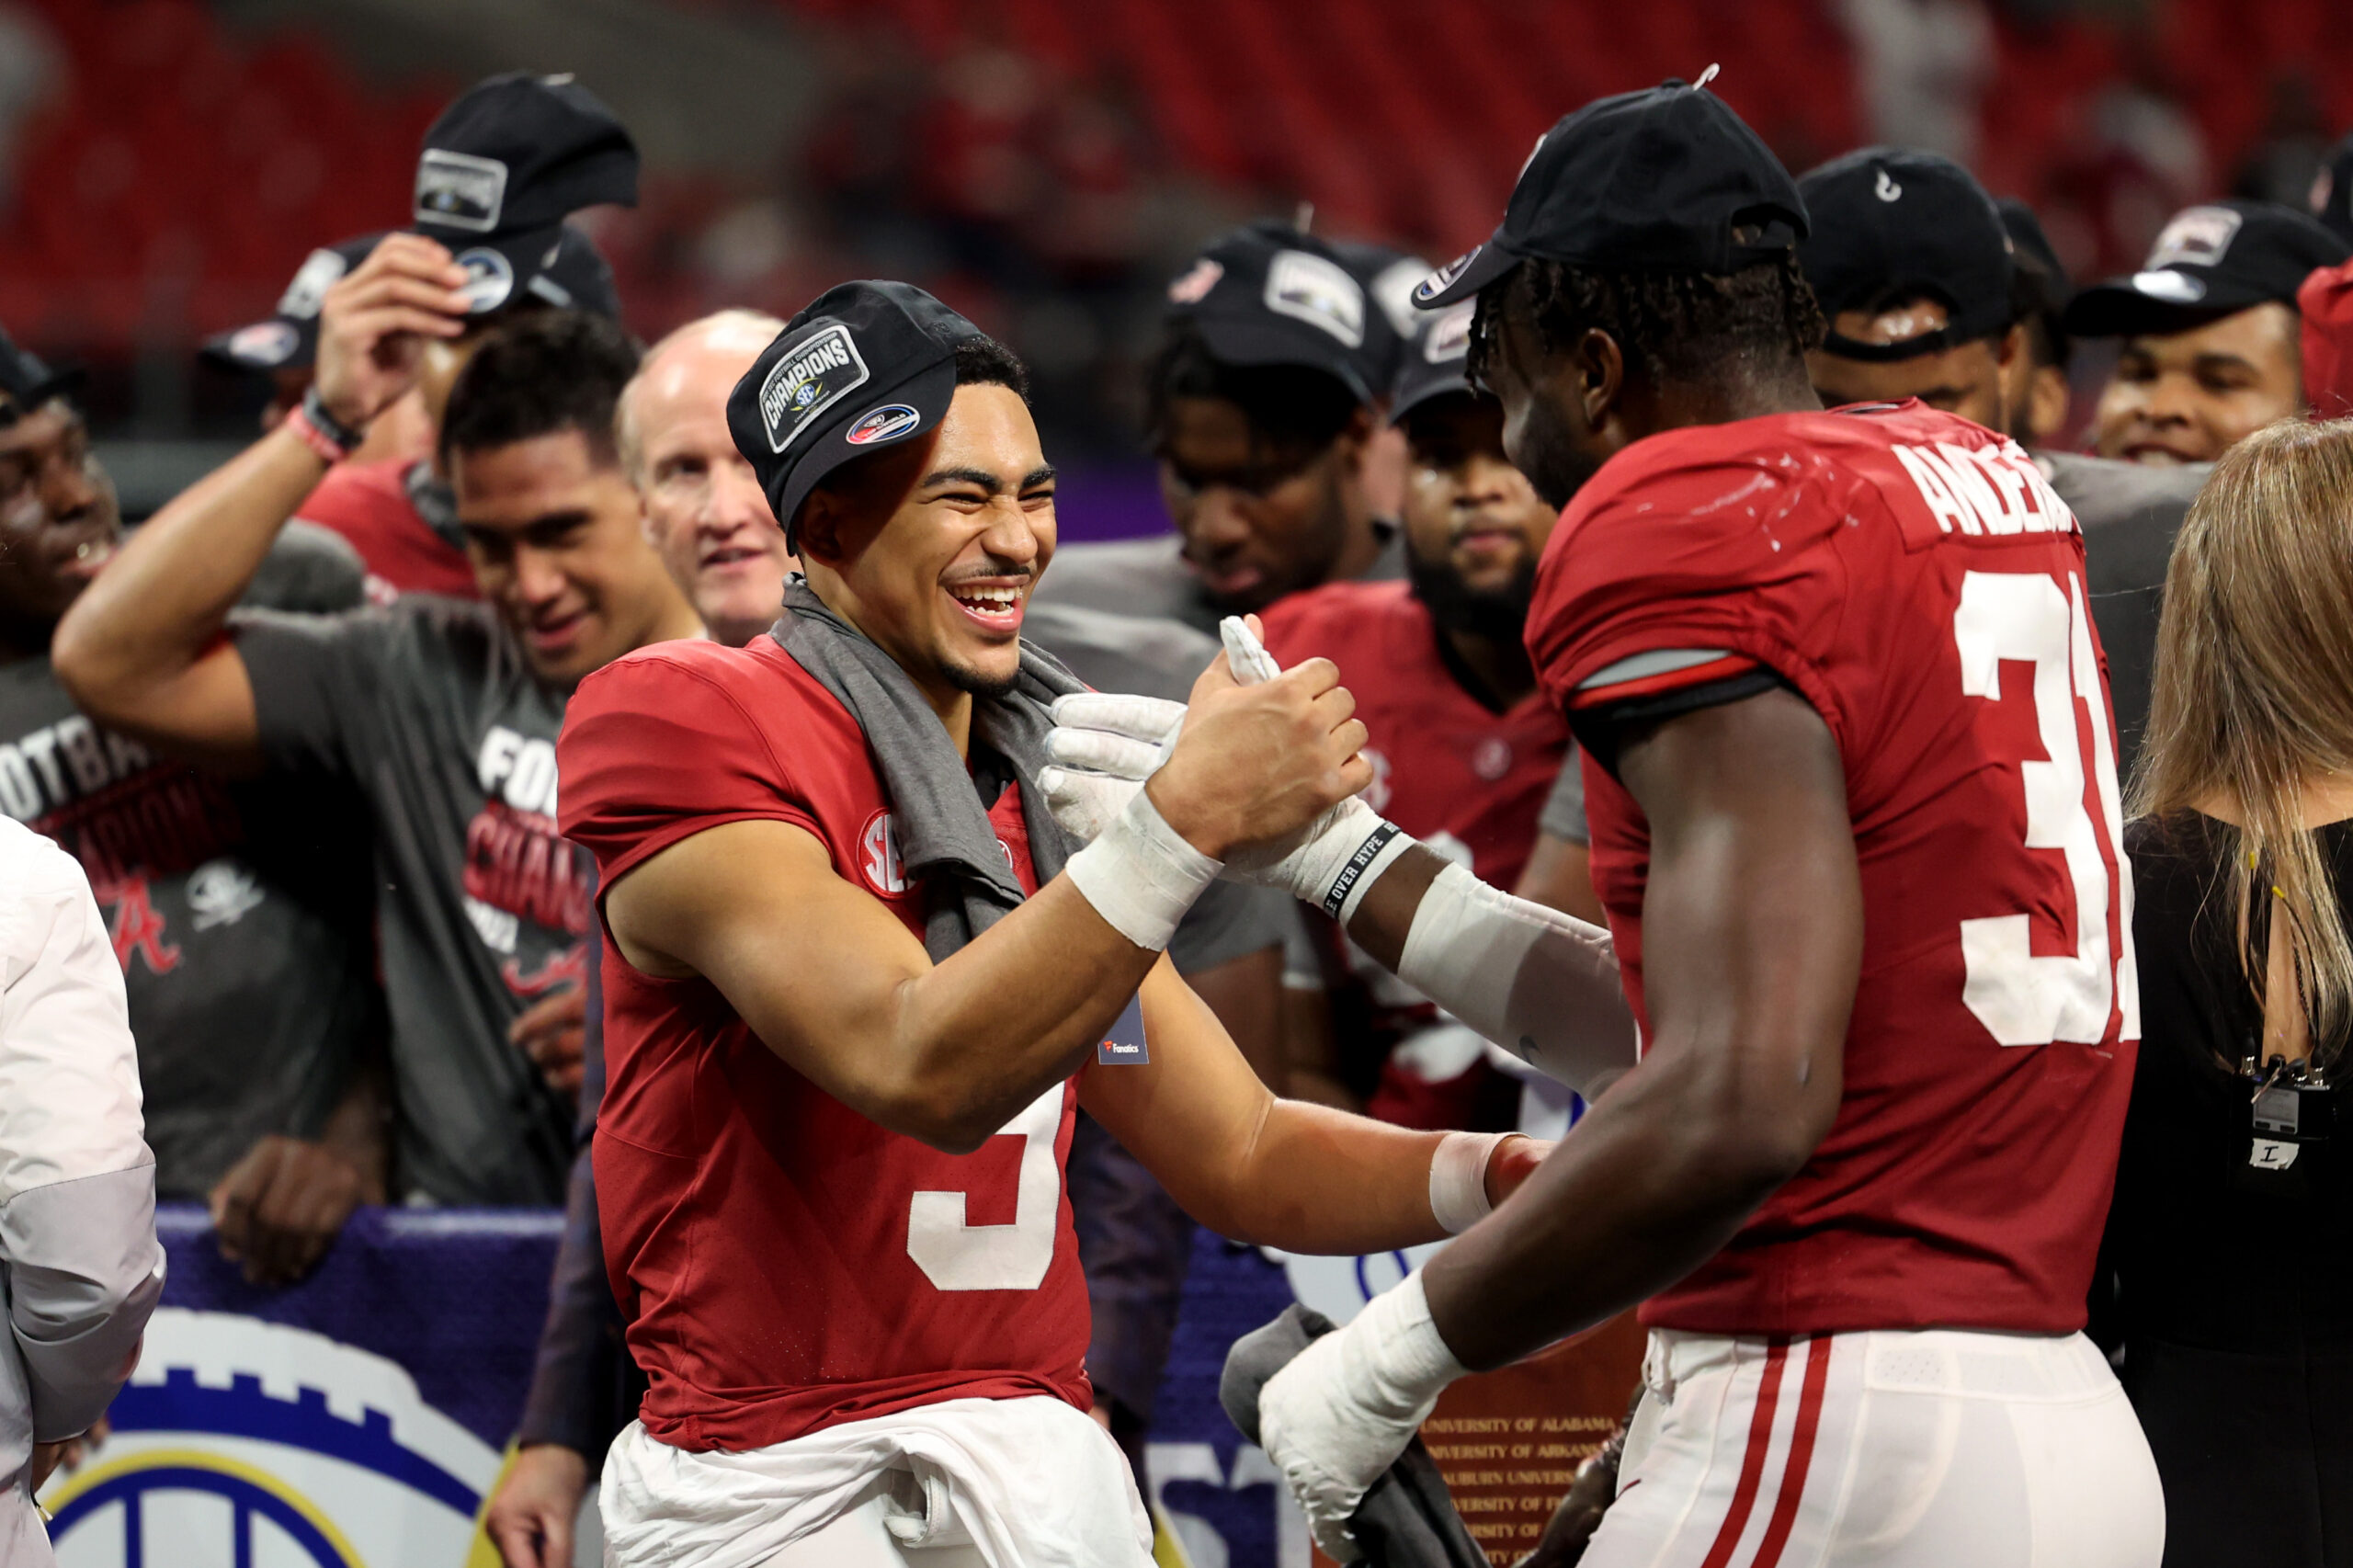 Former Alabama edge rusher Will Anderson Jr. eager to face former Alabama teammate